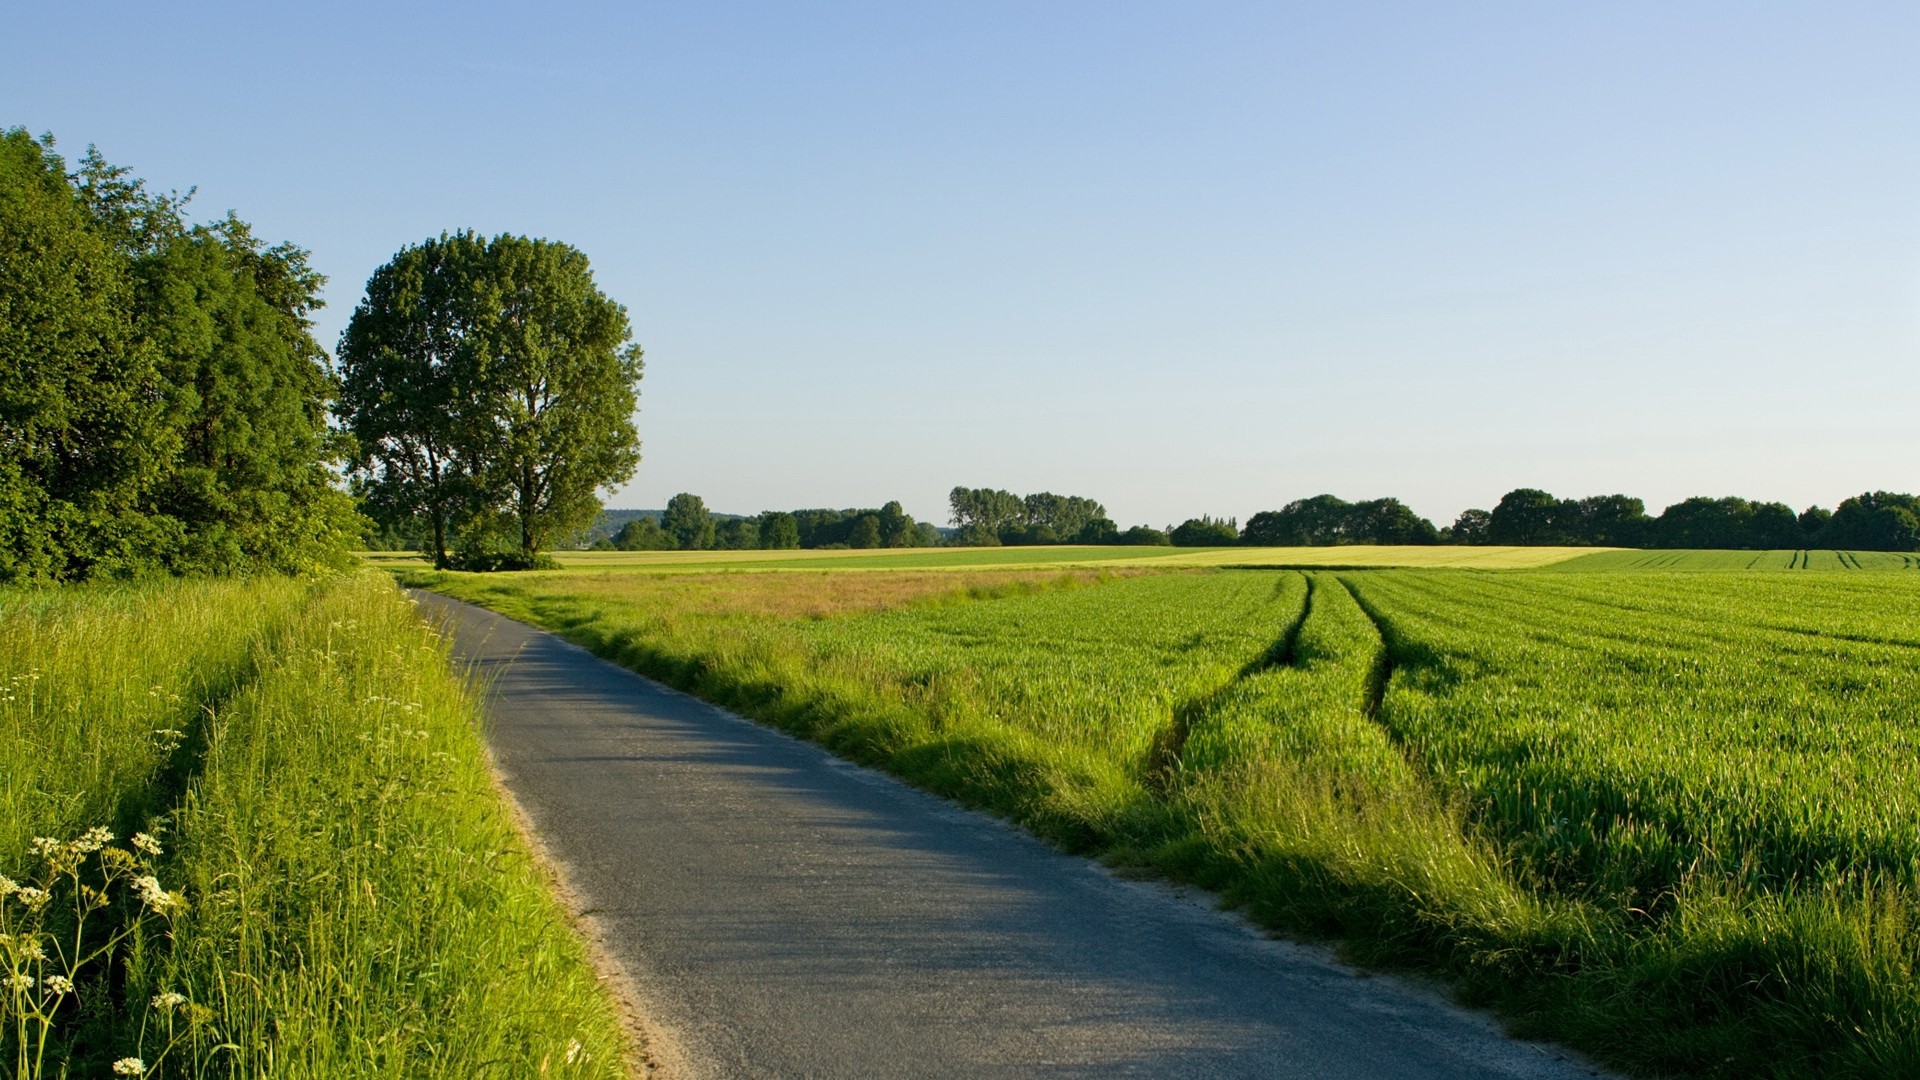 1920x1080 wallpapers: road, field, greens, traces, trees (image)